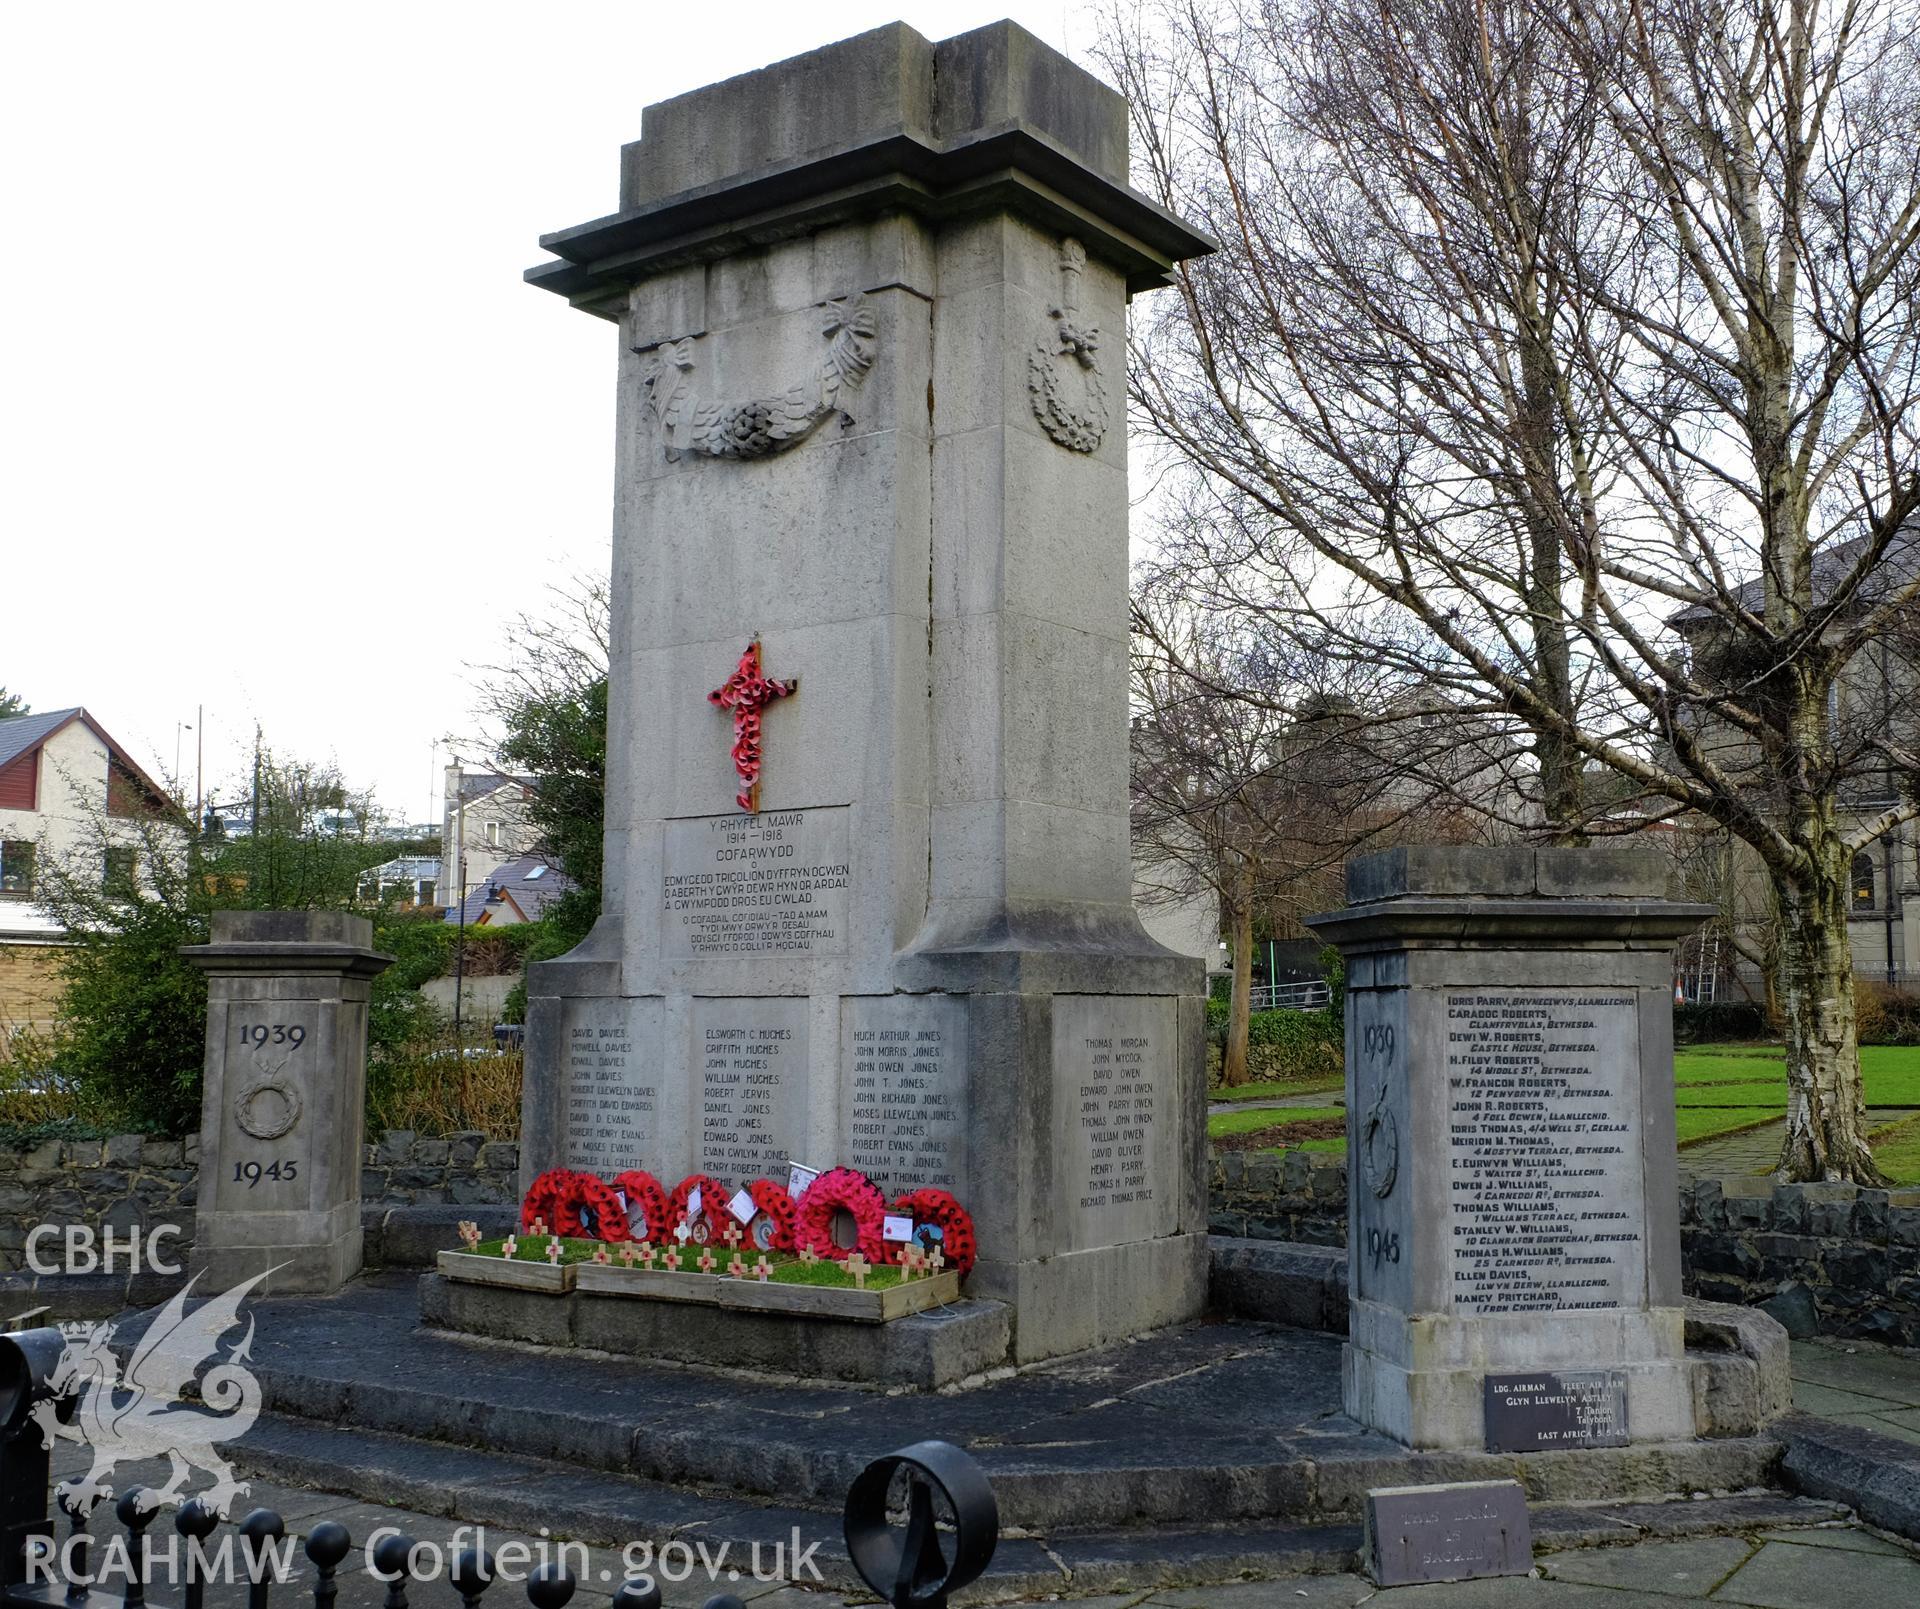 Colour photograph showing a view of Bethesda War Memorial, looking north west from the high street, produced by Richard Hayman 16th February 2017